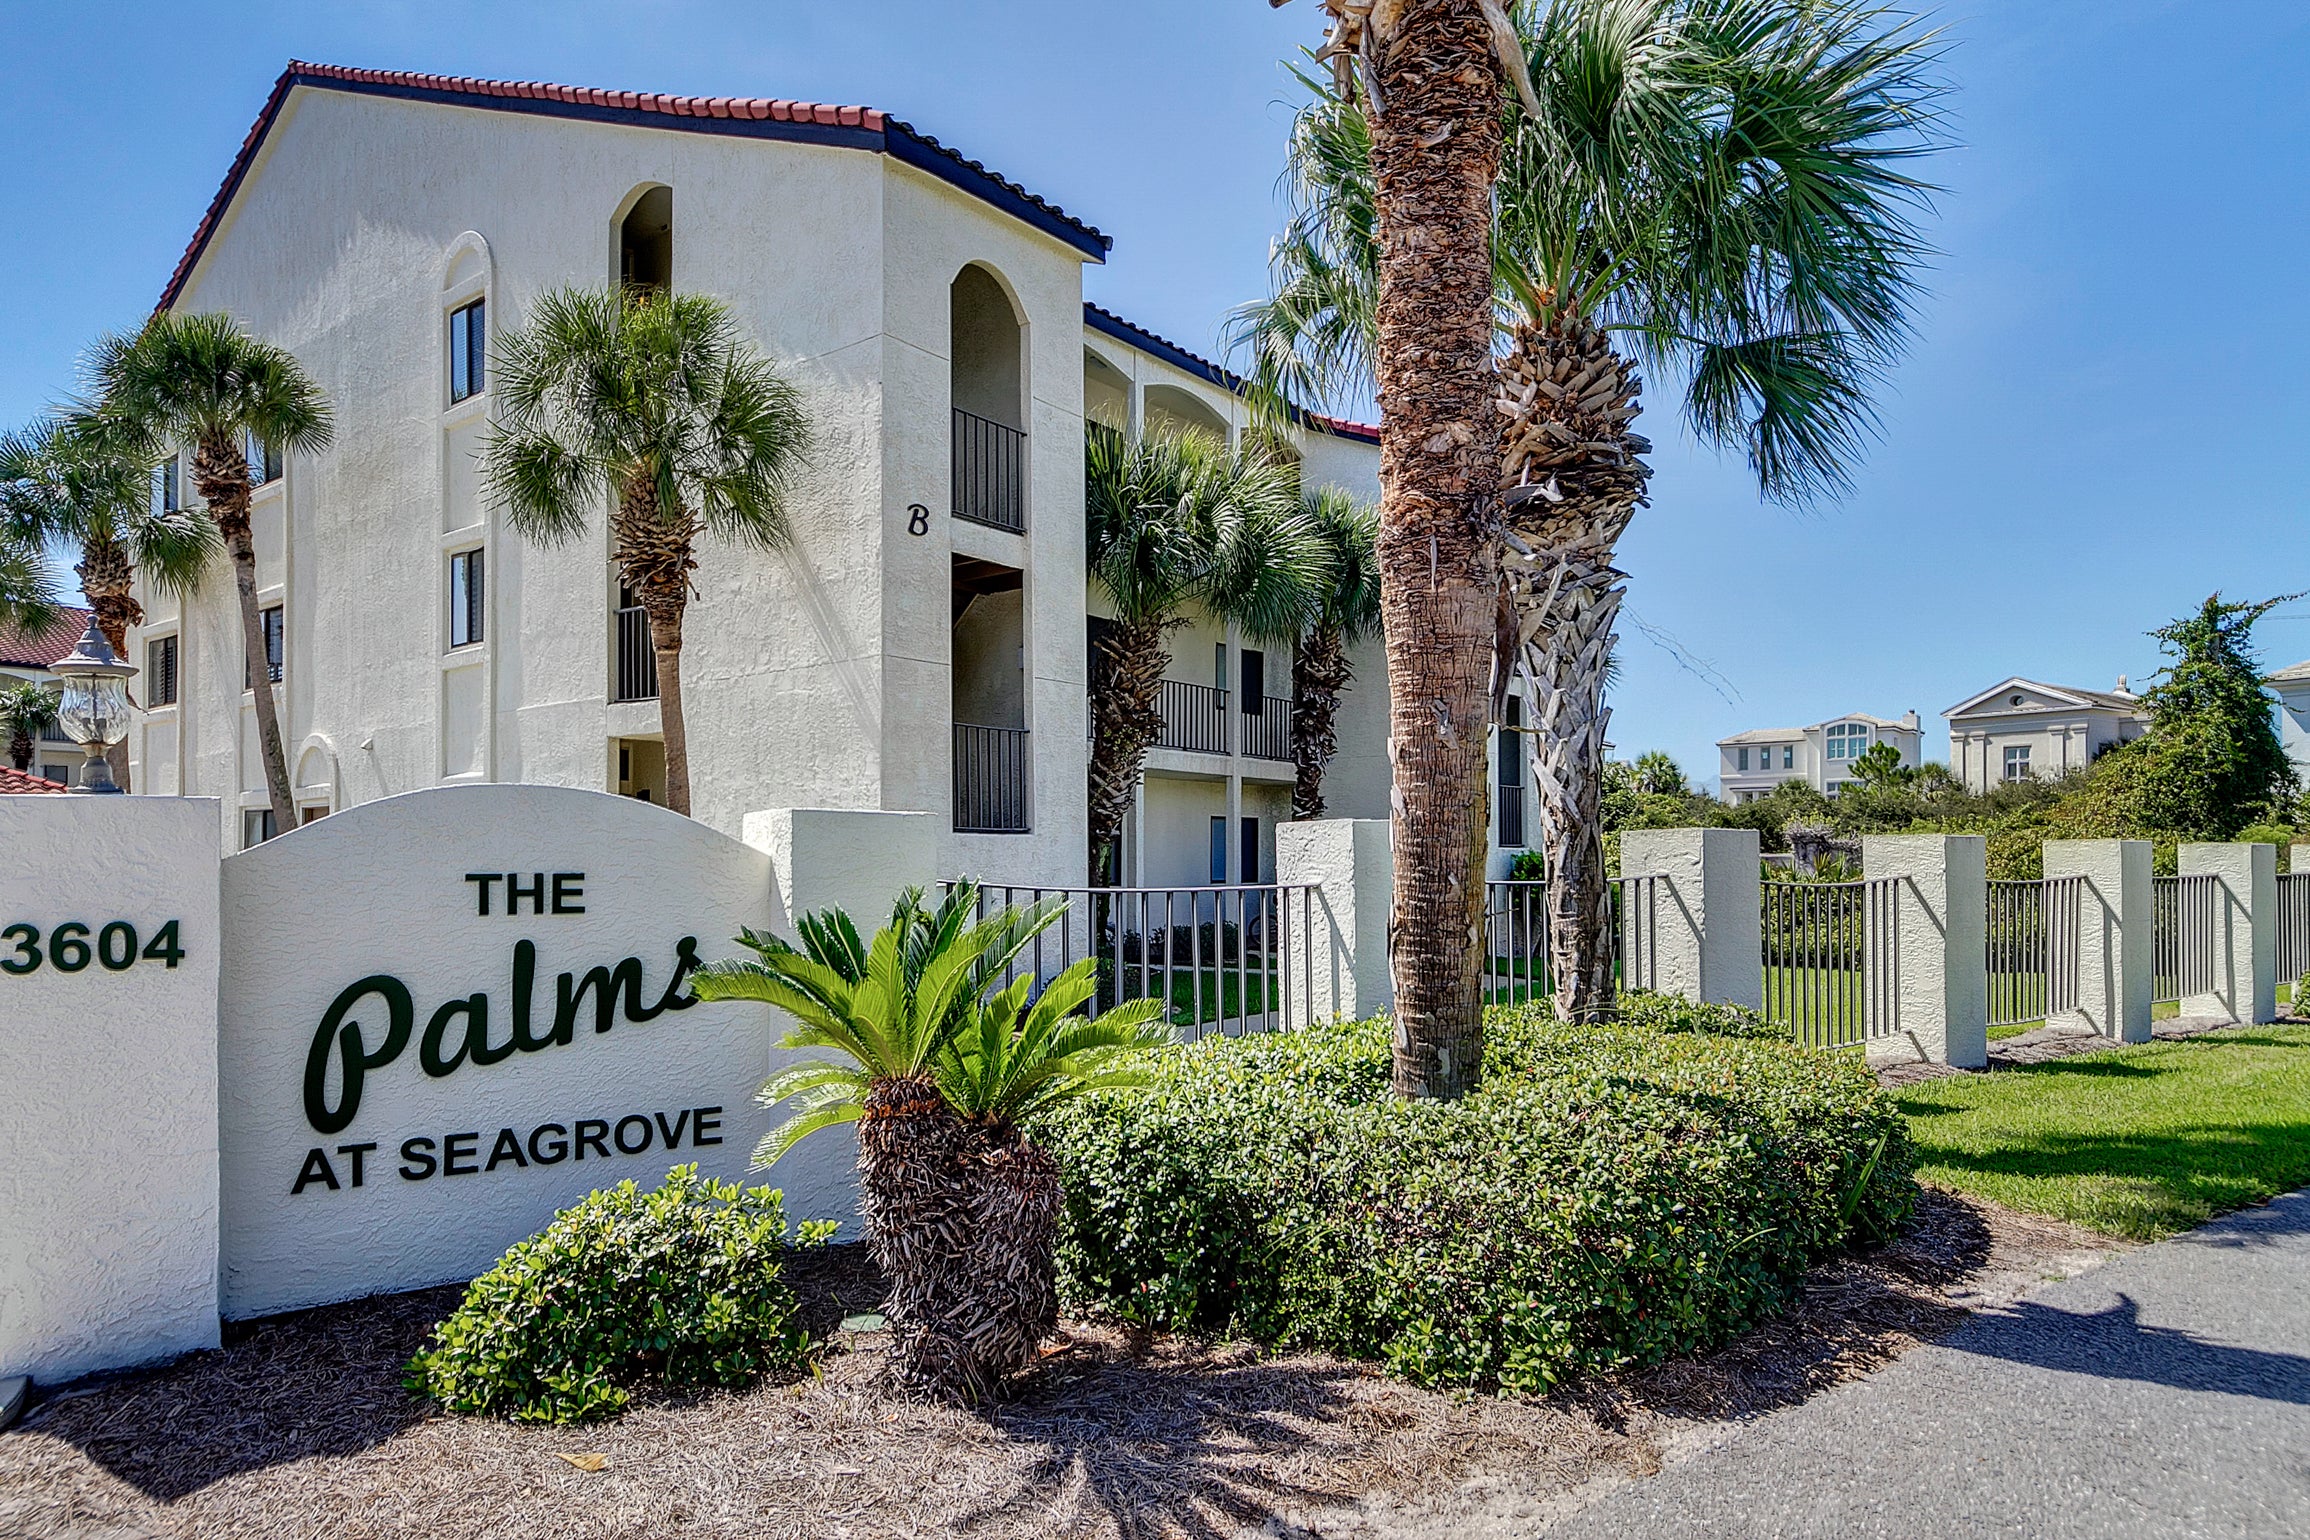 The Palms at Seagrove